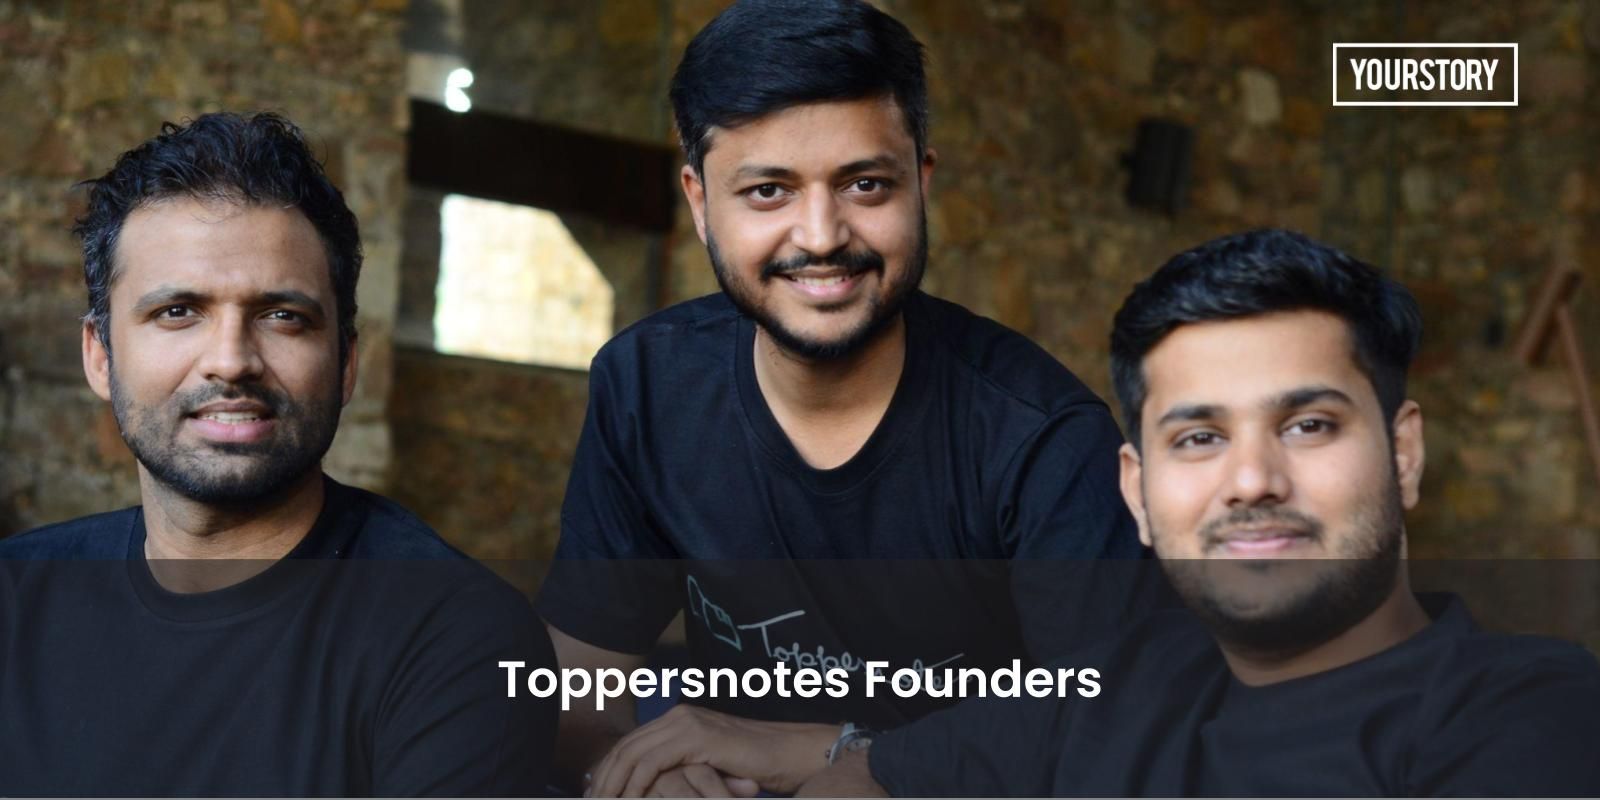 [Funding alert] Test prep startup Toppersnotes raises $1M in seed round led by Inflection Point Ventures